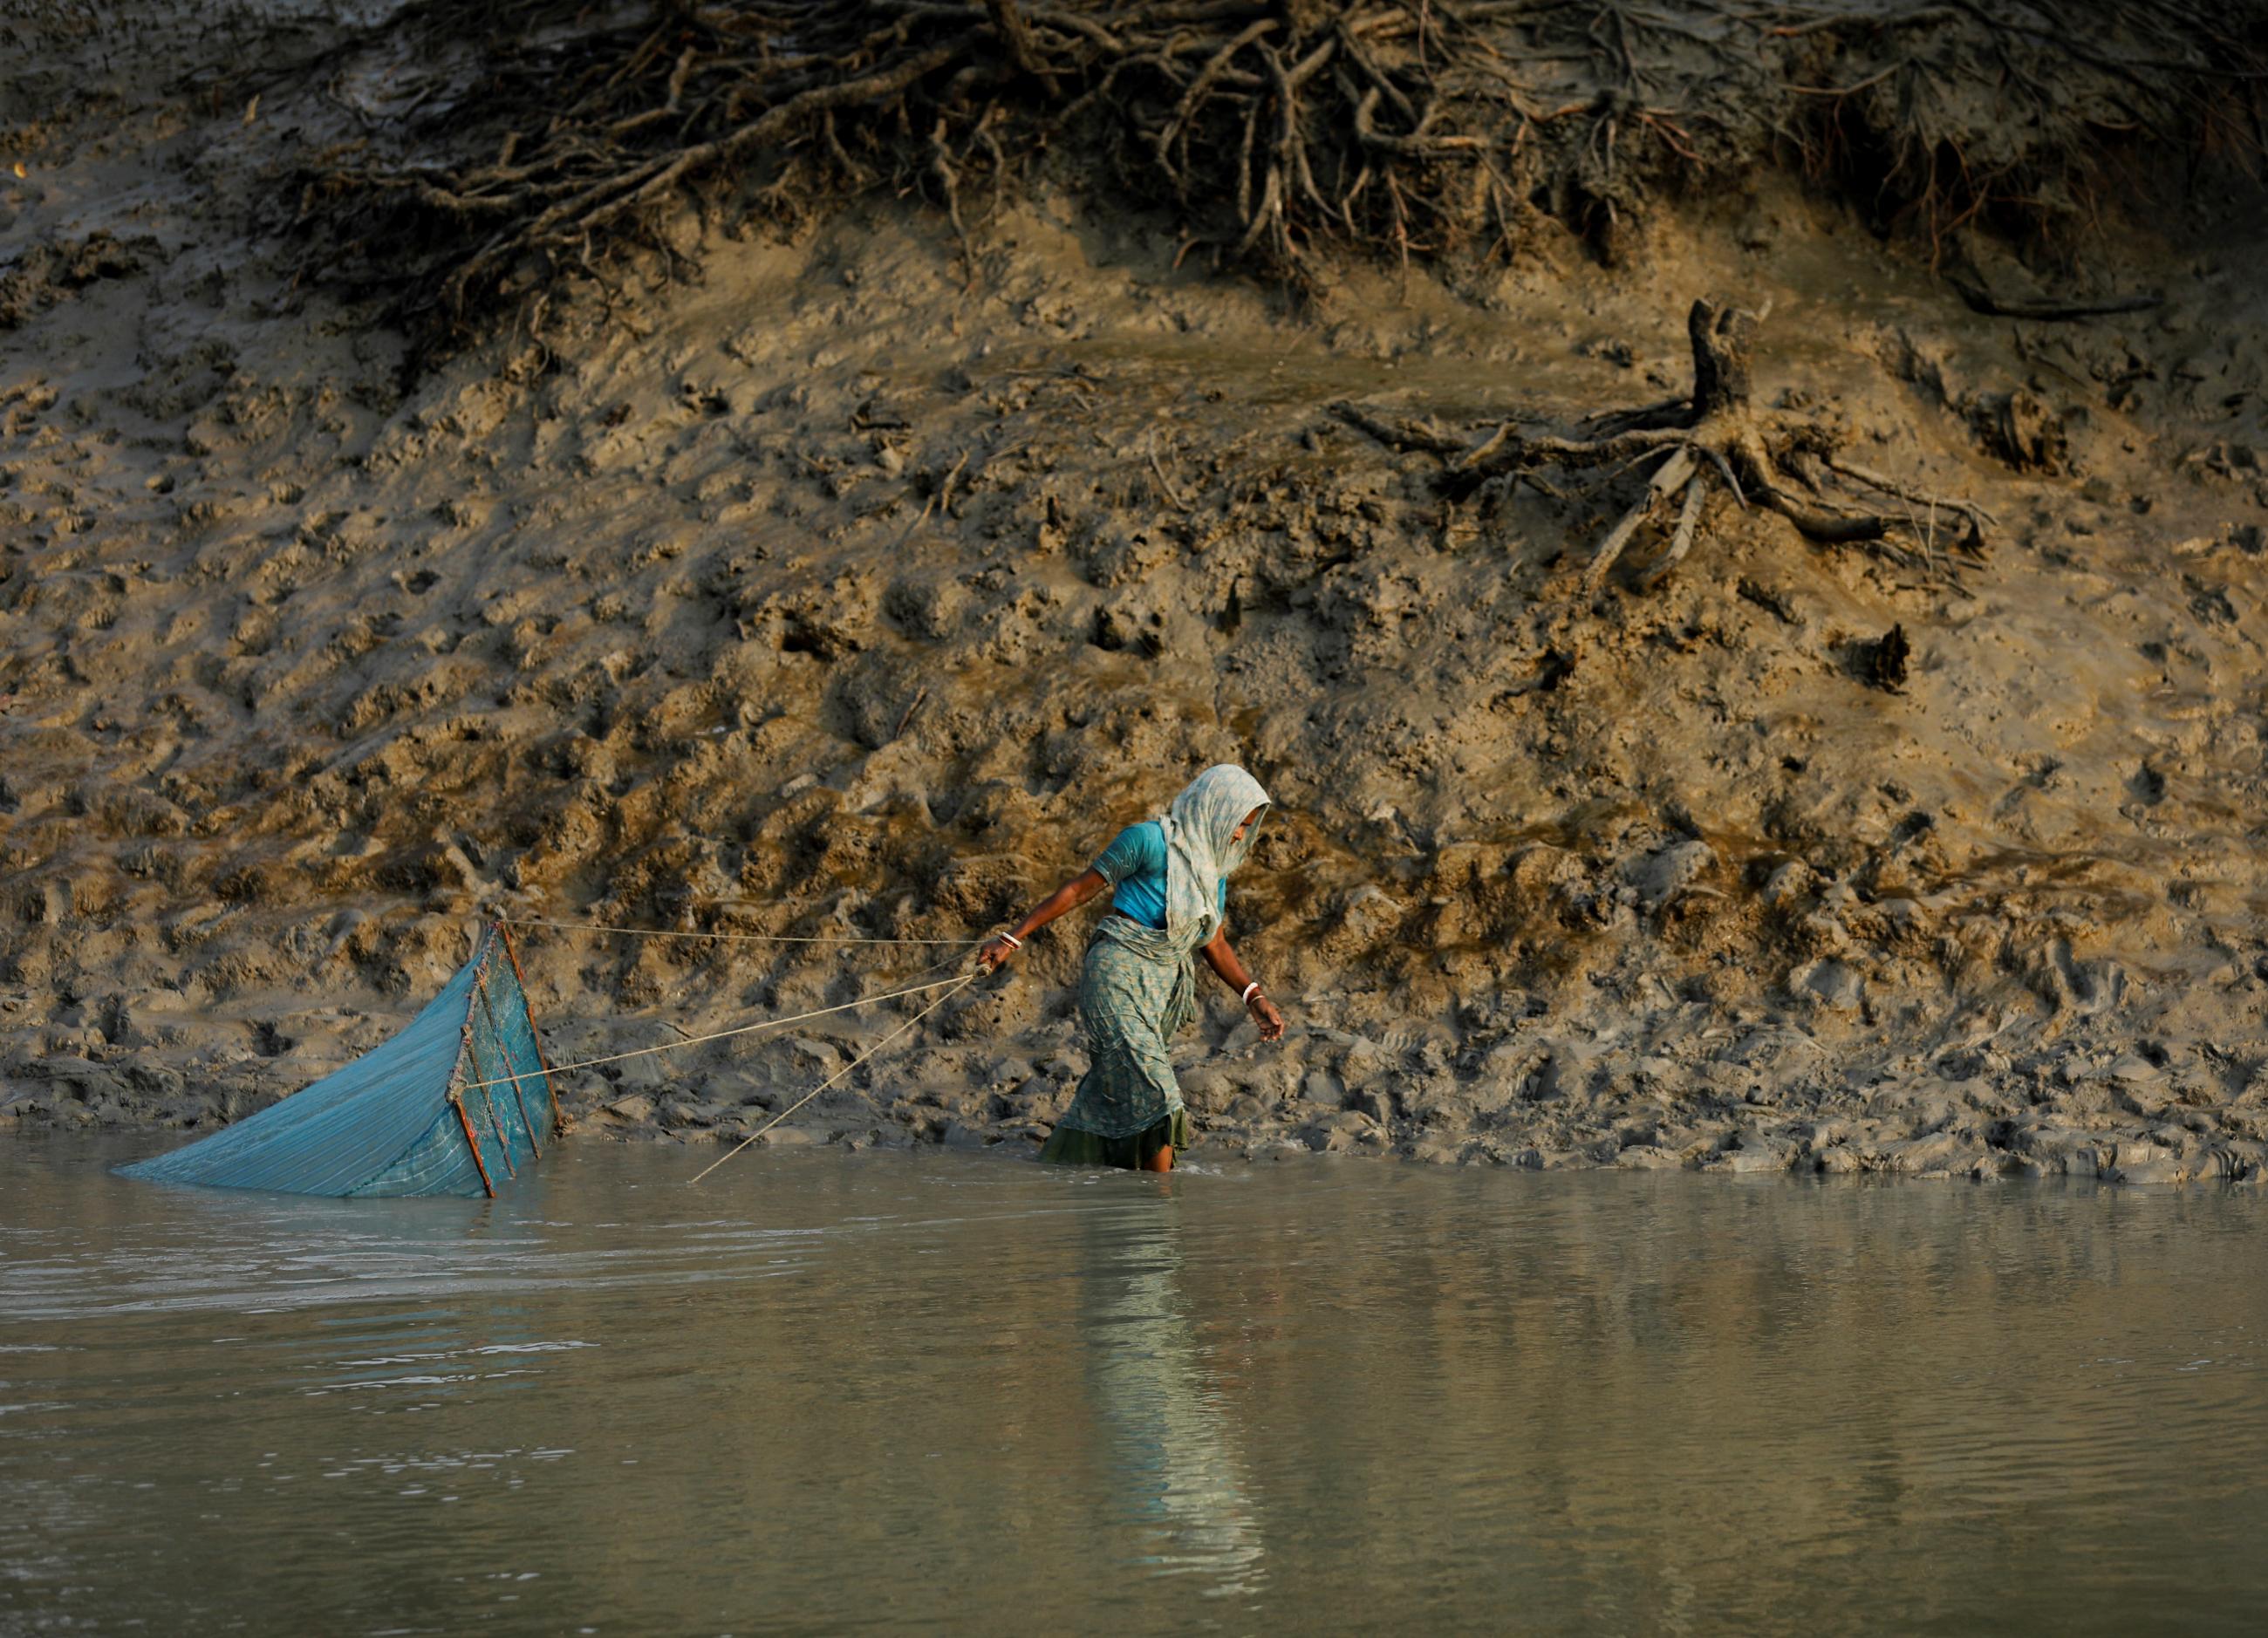 A woman fishes along the banks of a river near the island of Satjelia in the Sundarbans, India, on December 16, 2019.